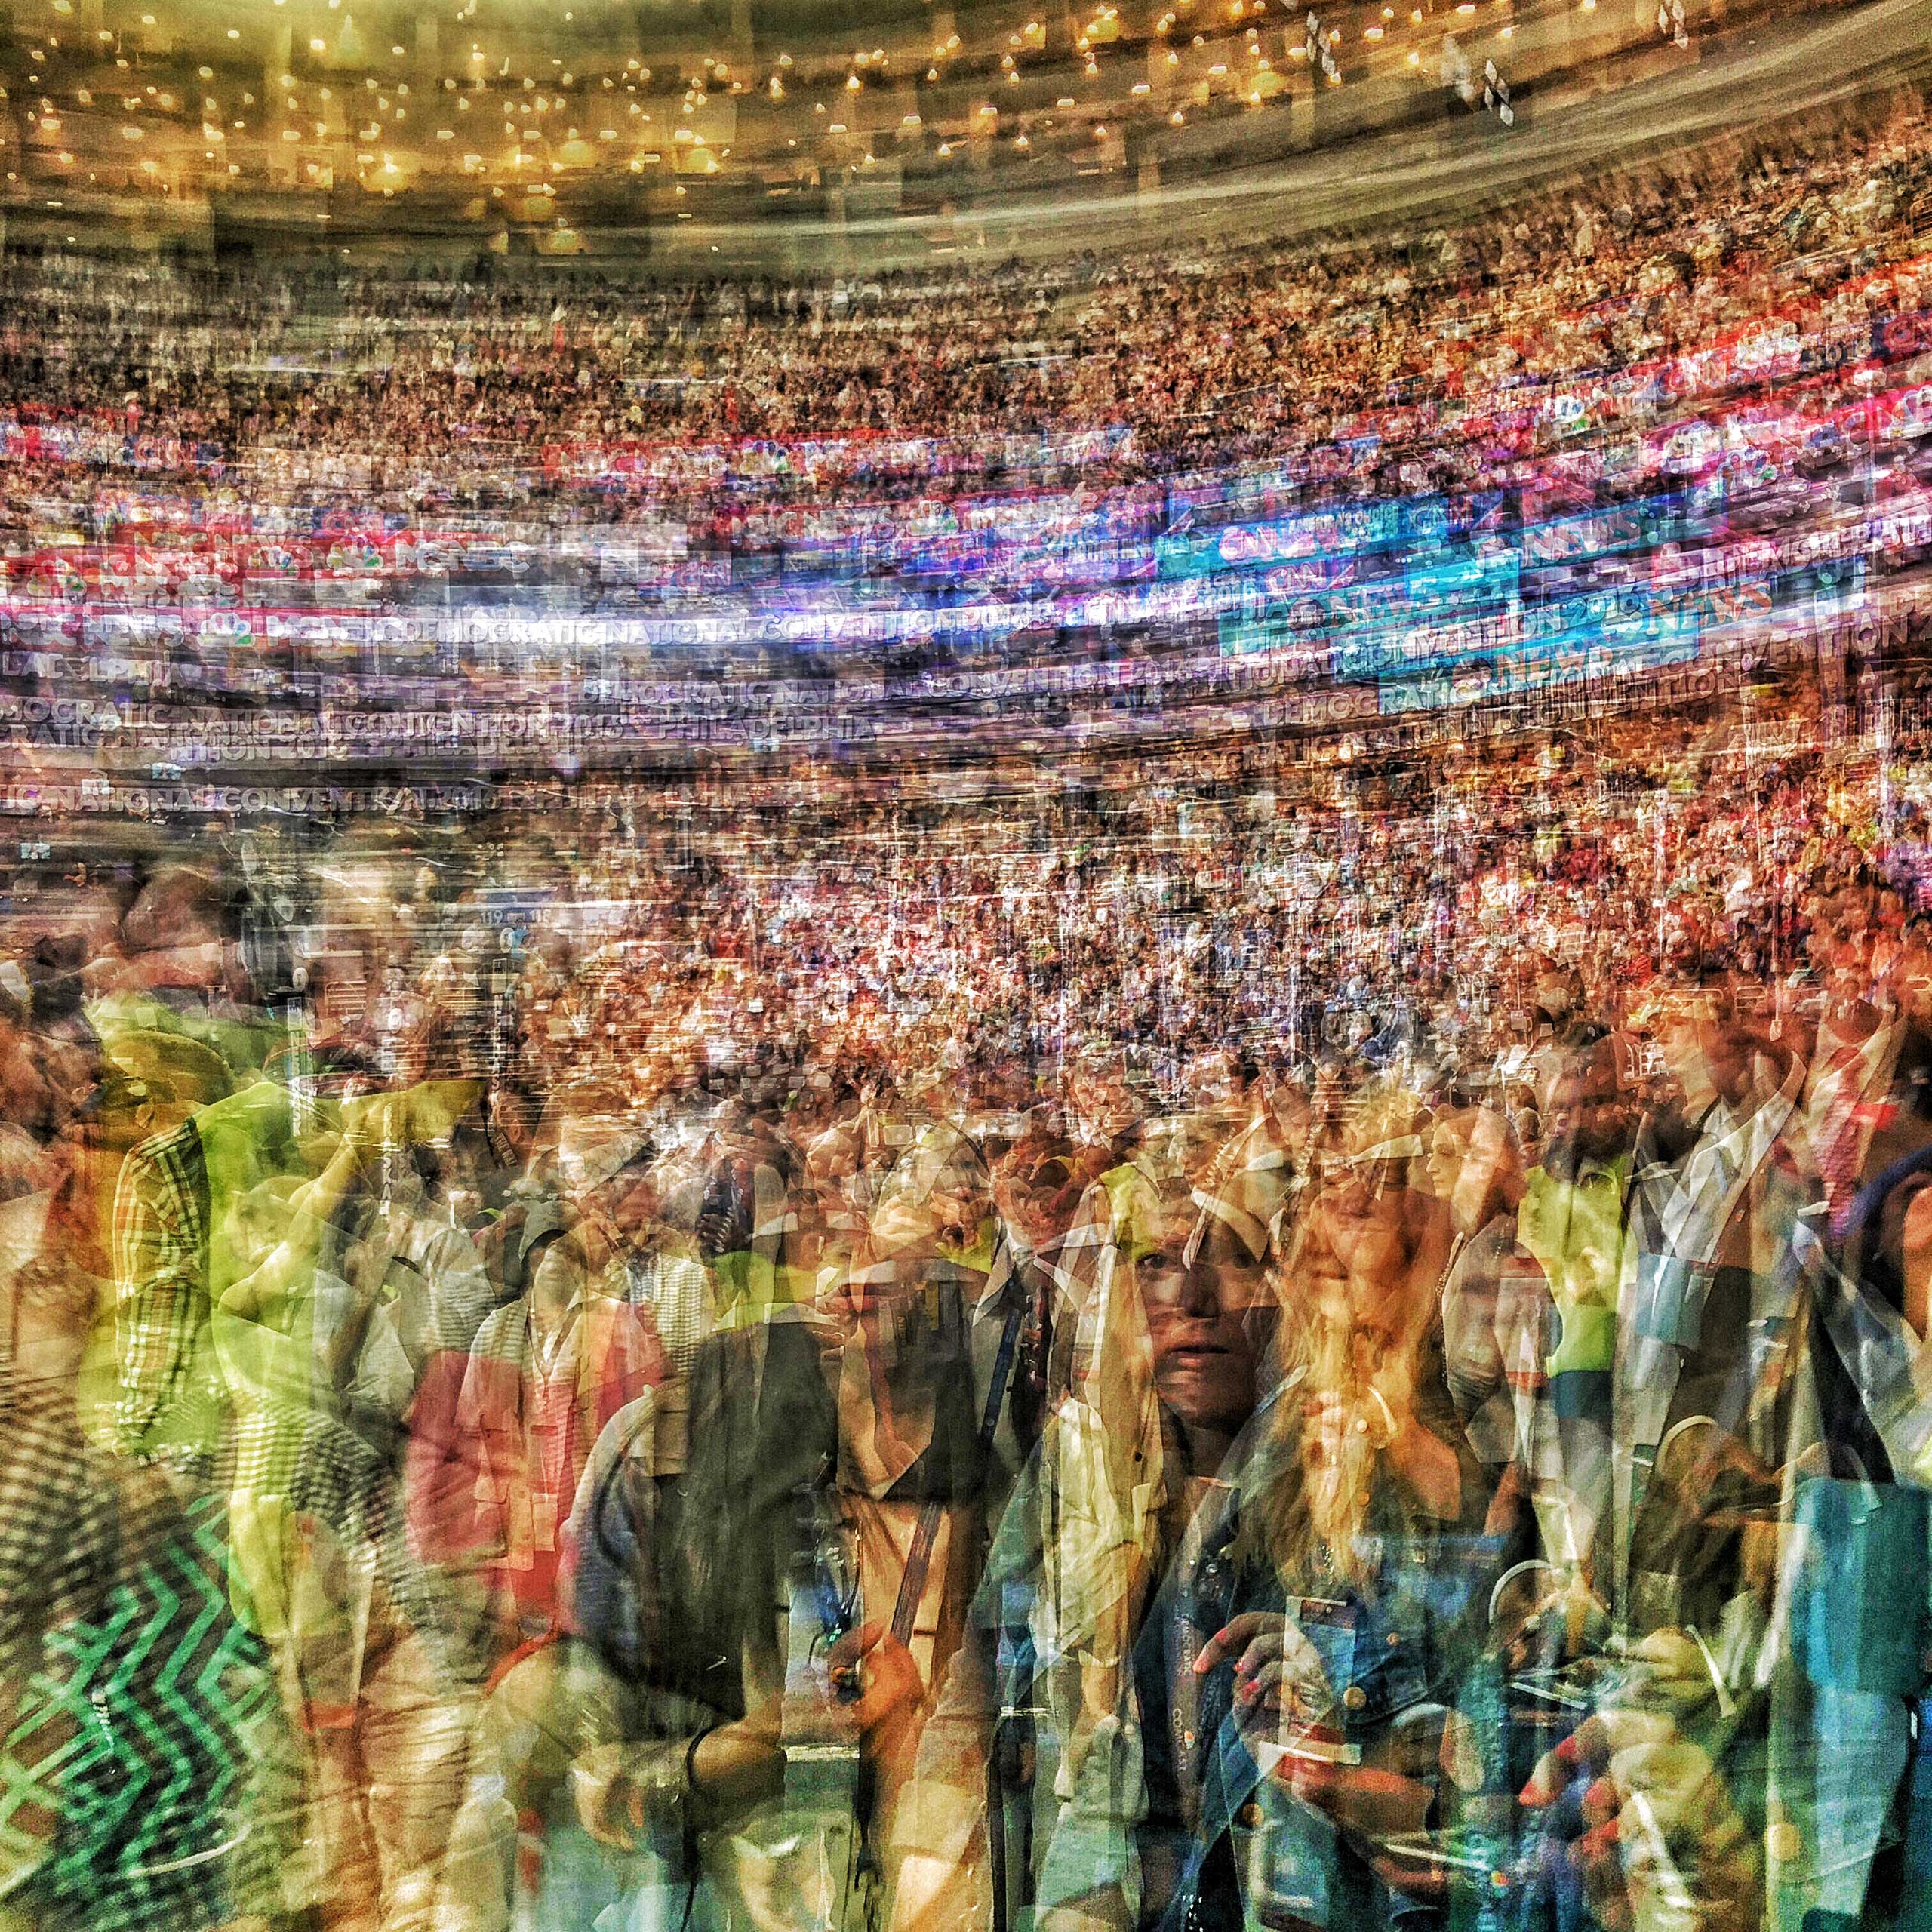 This multiple-exposure photograph captures the floor of the Democratic National Convention at the Wells Fargo Center in Philadelphia on July 27, 2016.